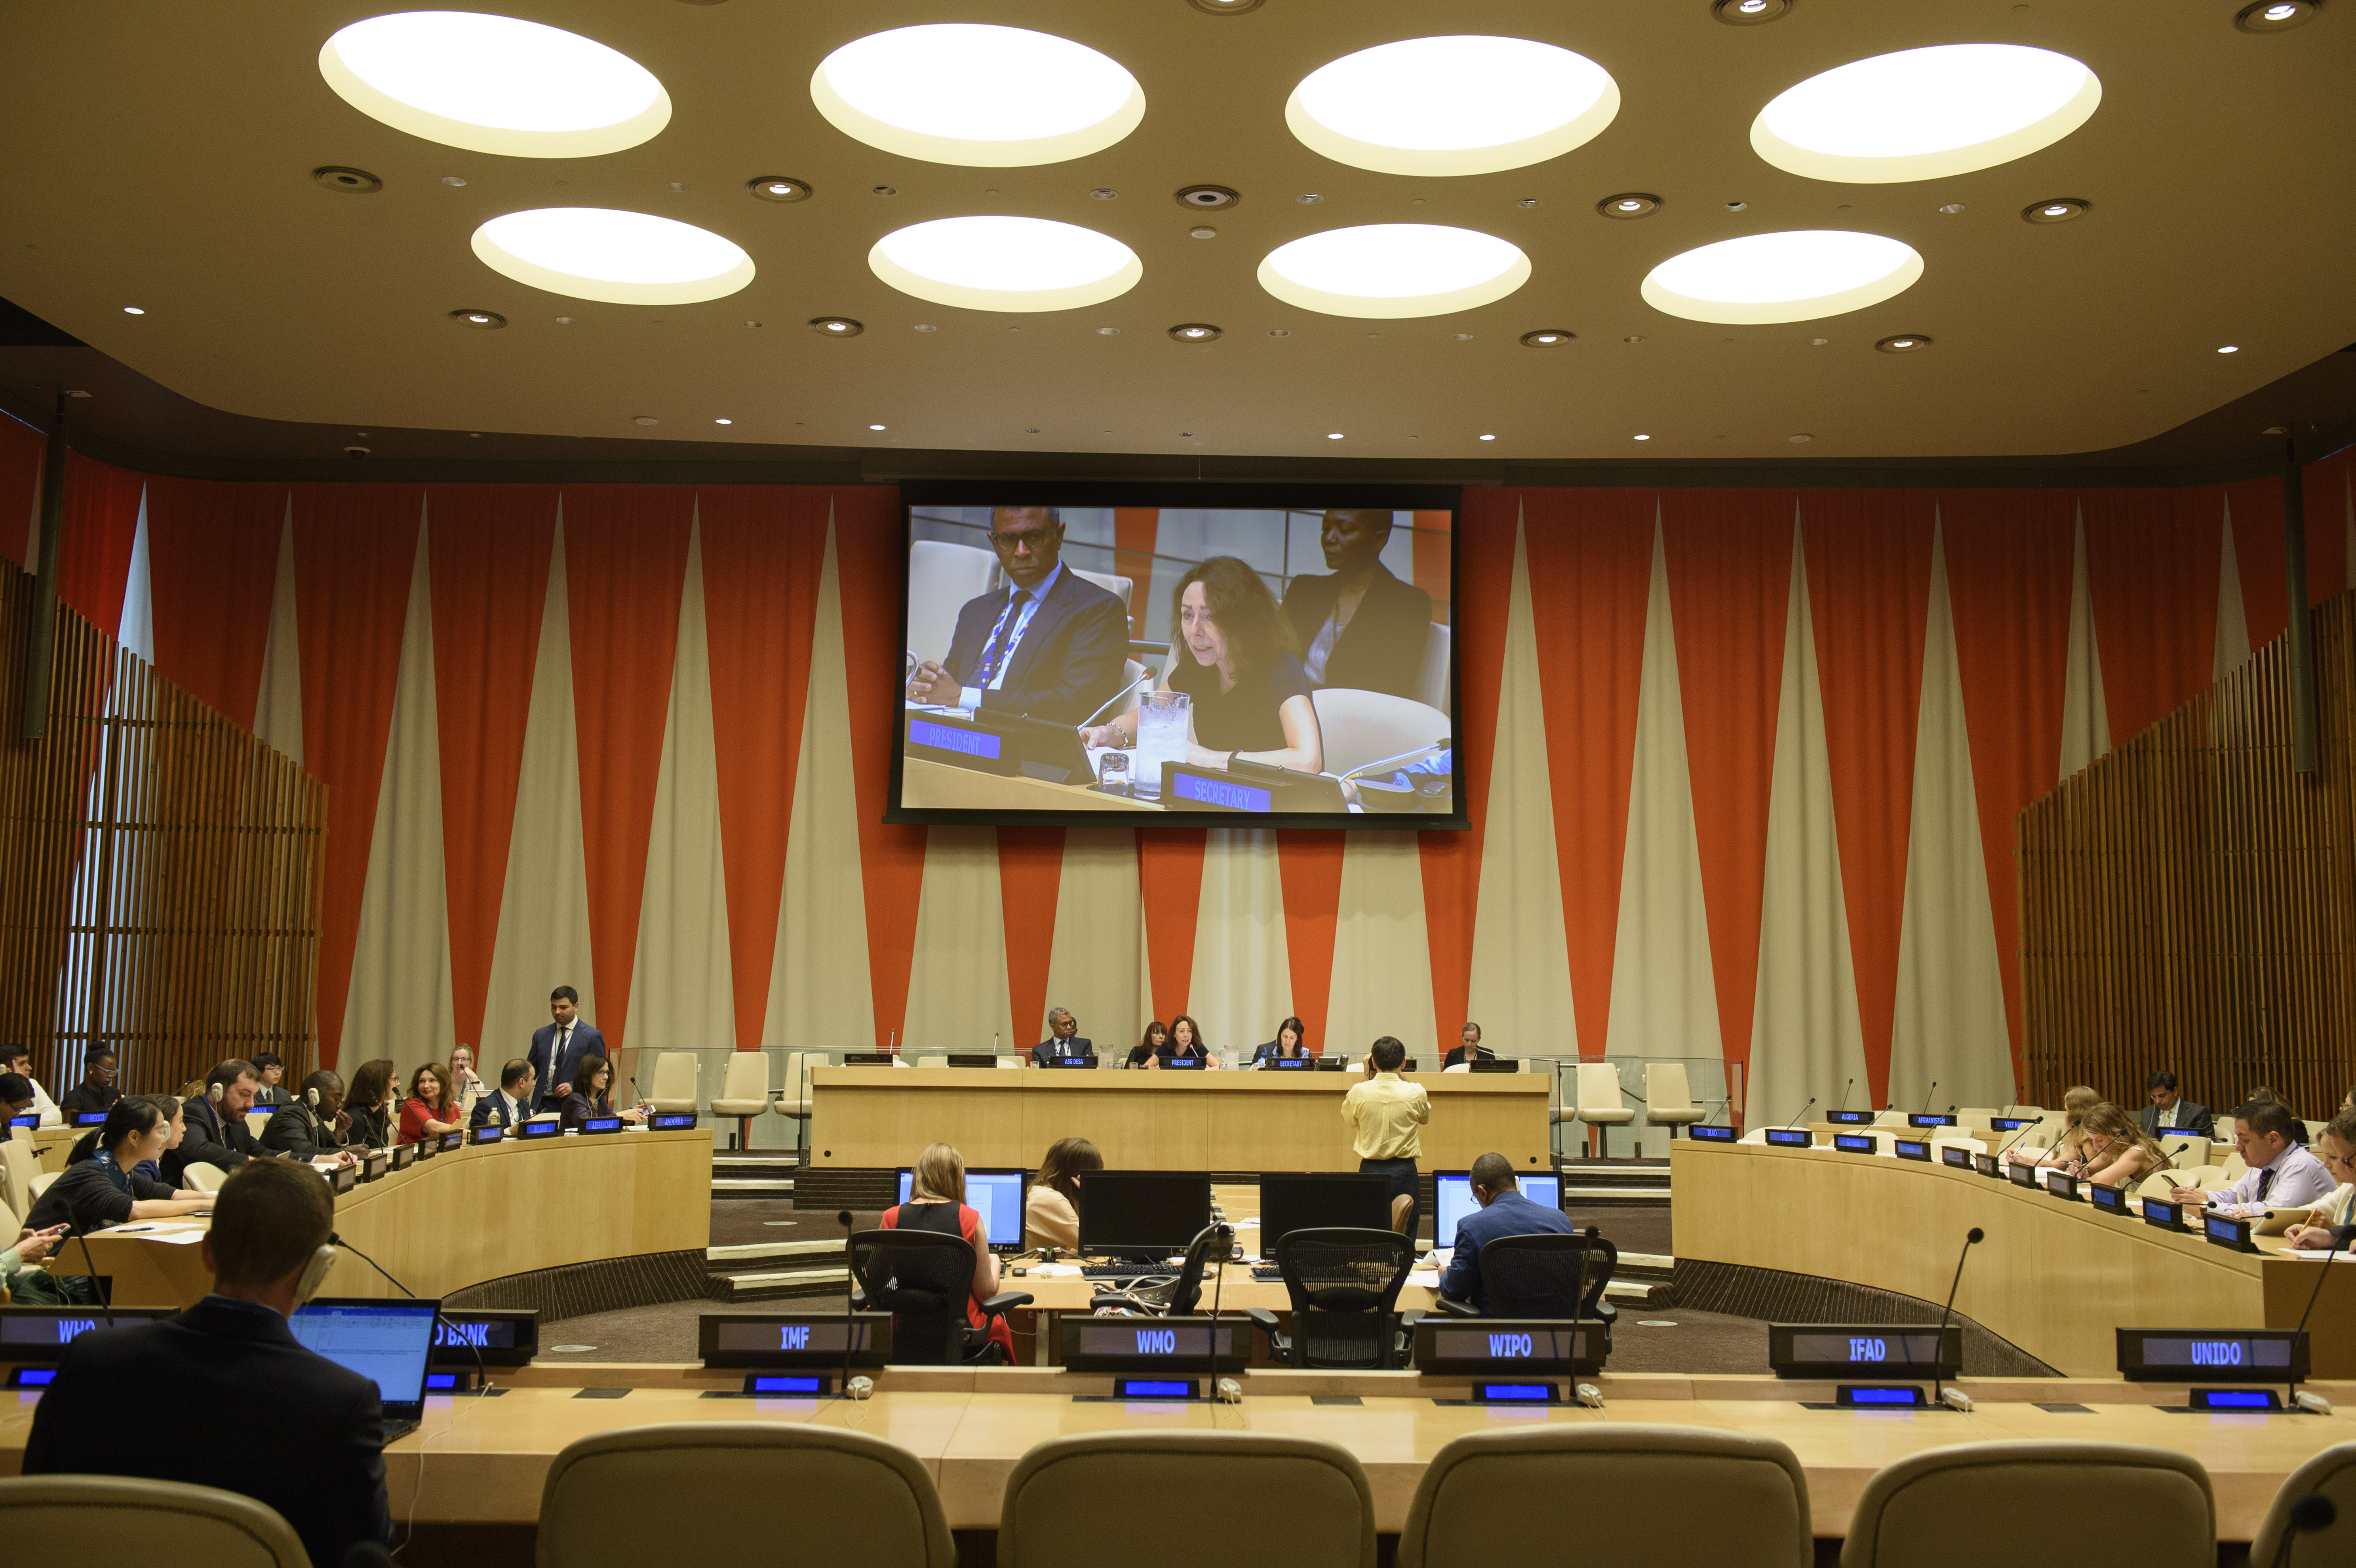 Economic and Social Council 2019 session, 1st plenary meeting Election of New President and Vice President Marie Chatardov, Permanent Representative of the Czech Republic to the UN and outgoing President of the Economic and Social Council (ECOSOC) makers closing remarks.